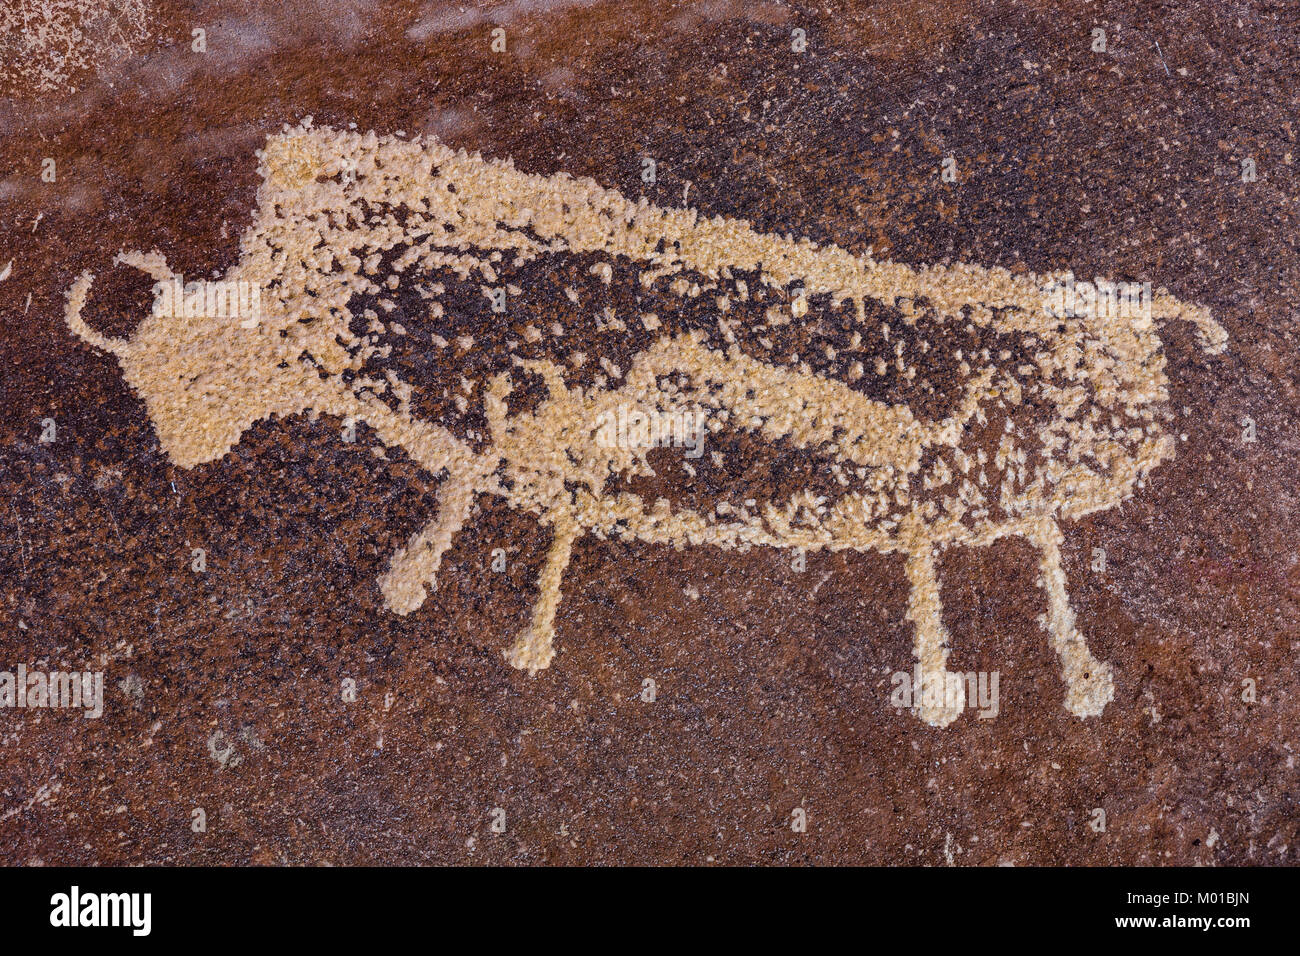 An imaginative and conceptual petroglyph that appears to show a baby bison within a mother bison, Nine Mile Canyon, Utah, USA Stock Photo